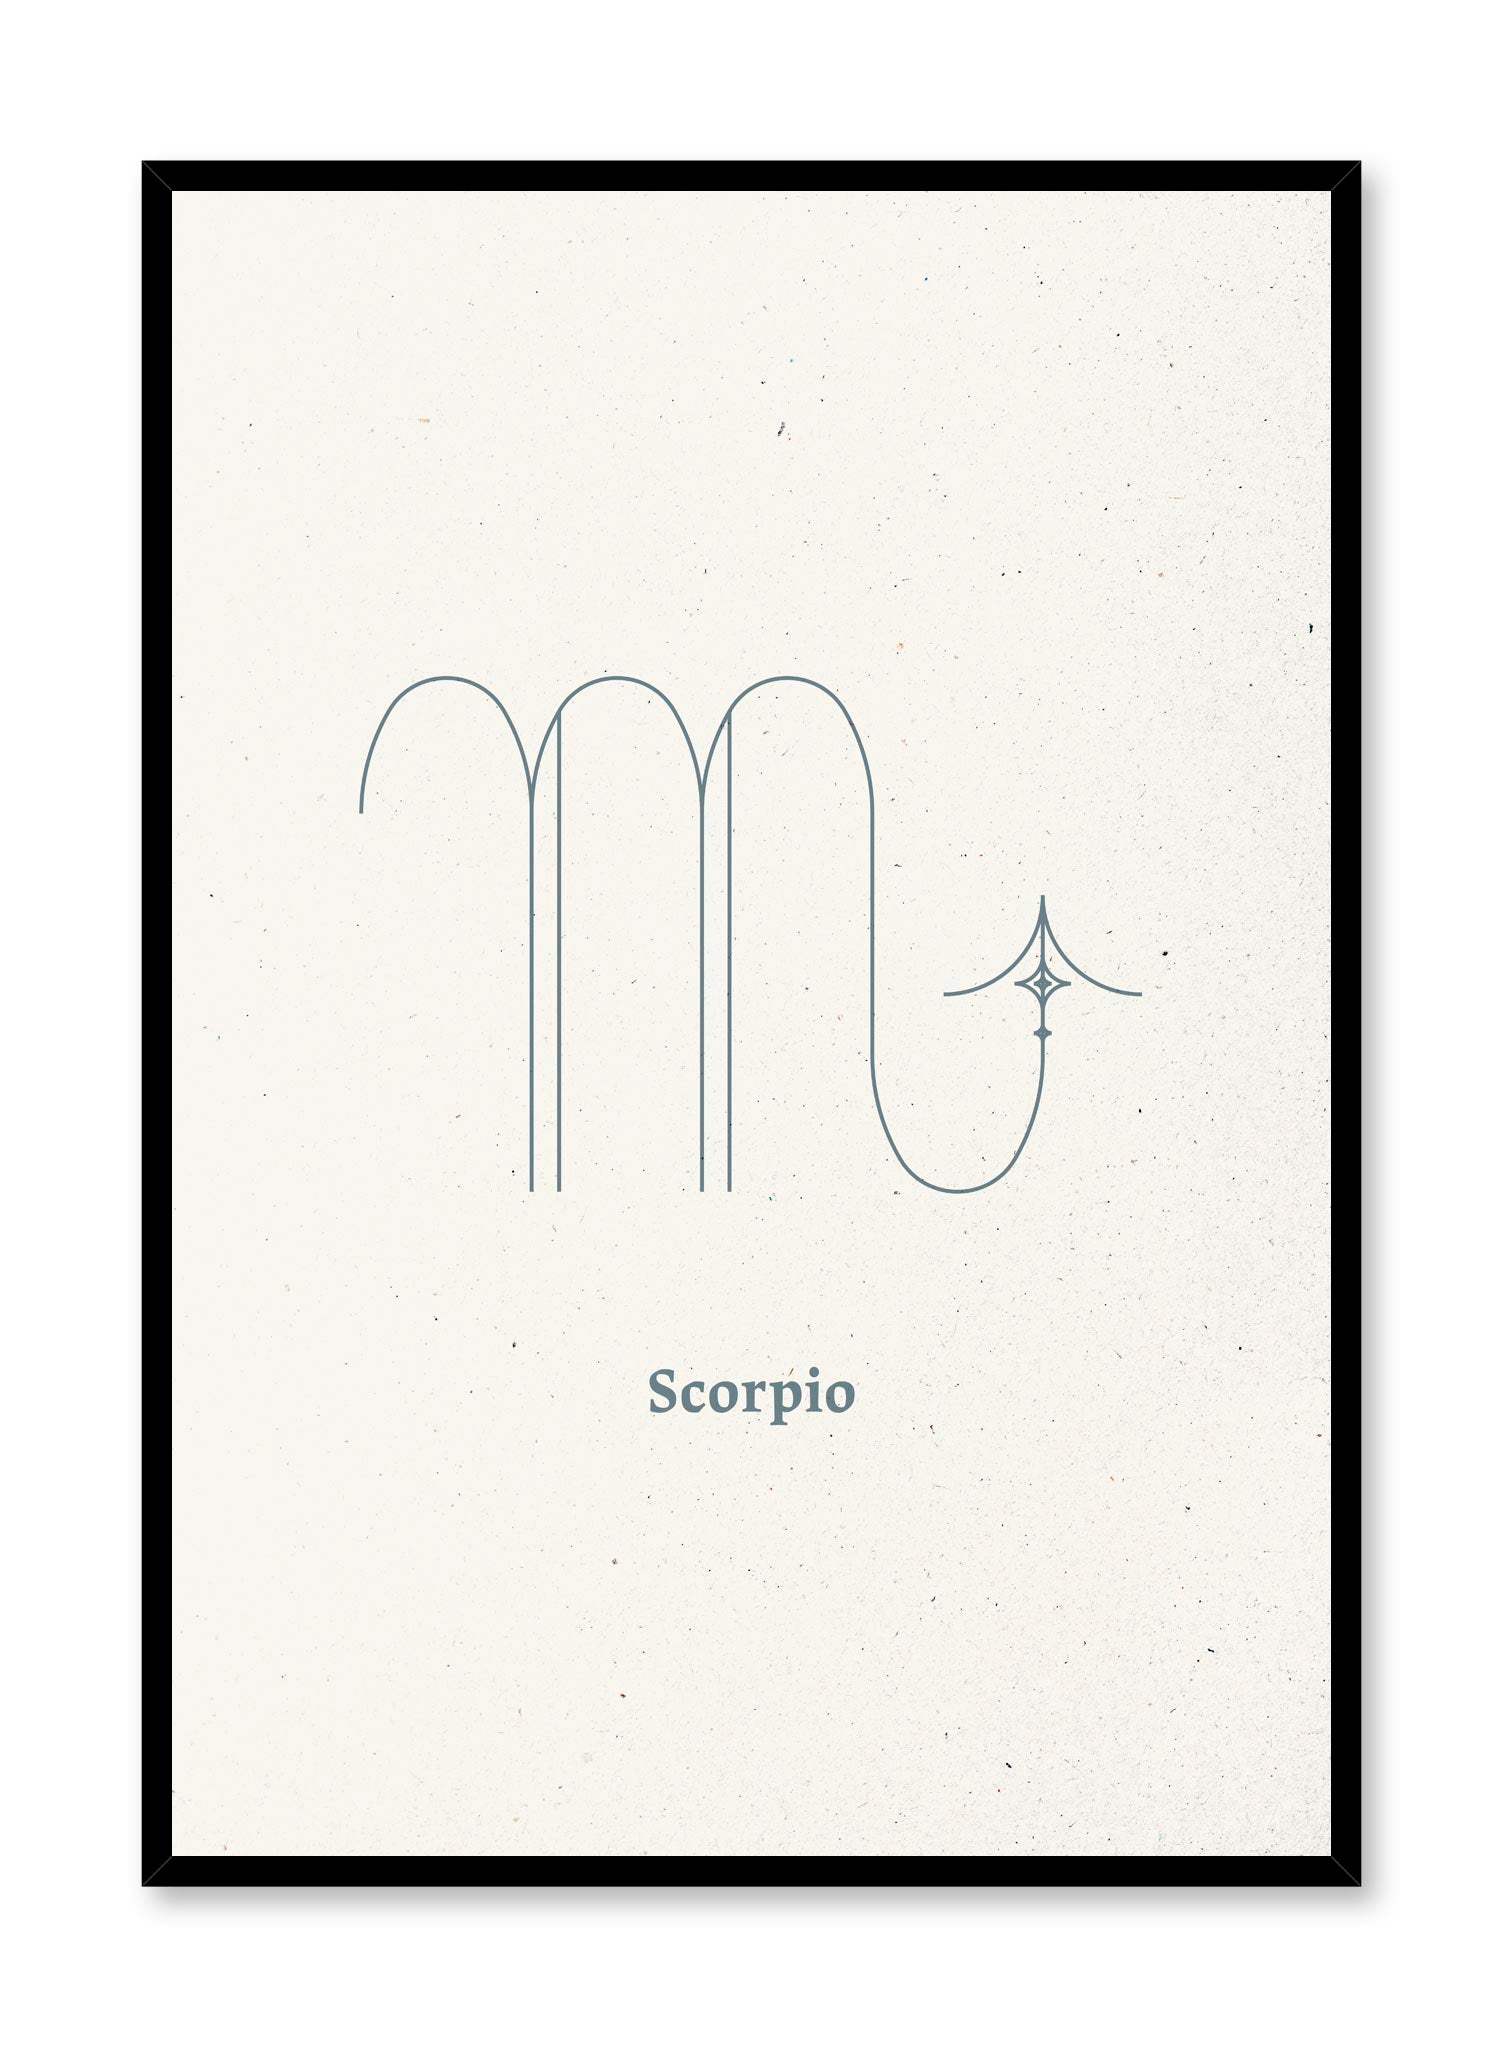 Minimalist celestial illustration poster by Opposite Wall with Scorpio symbol